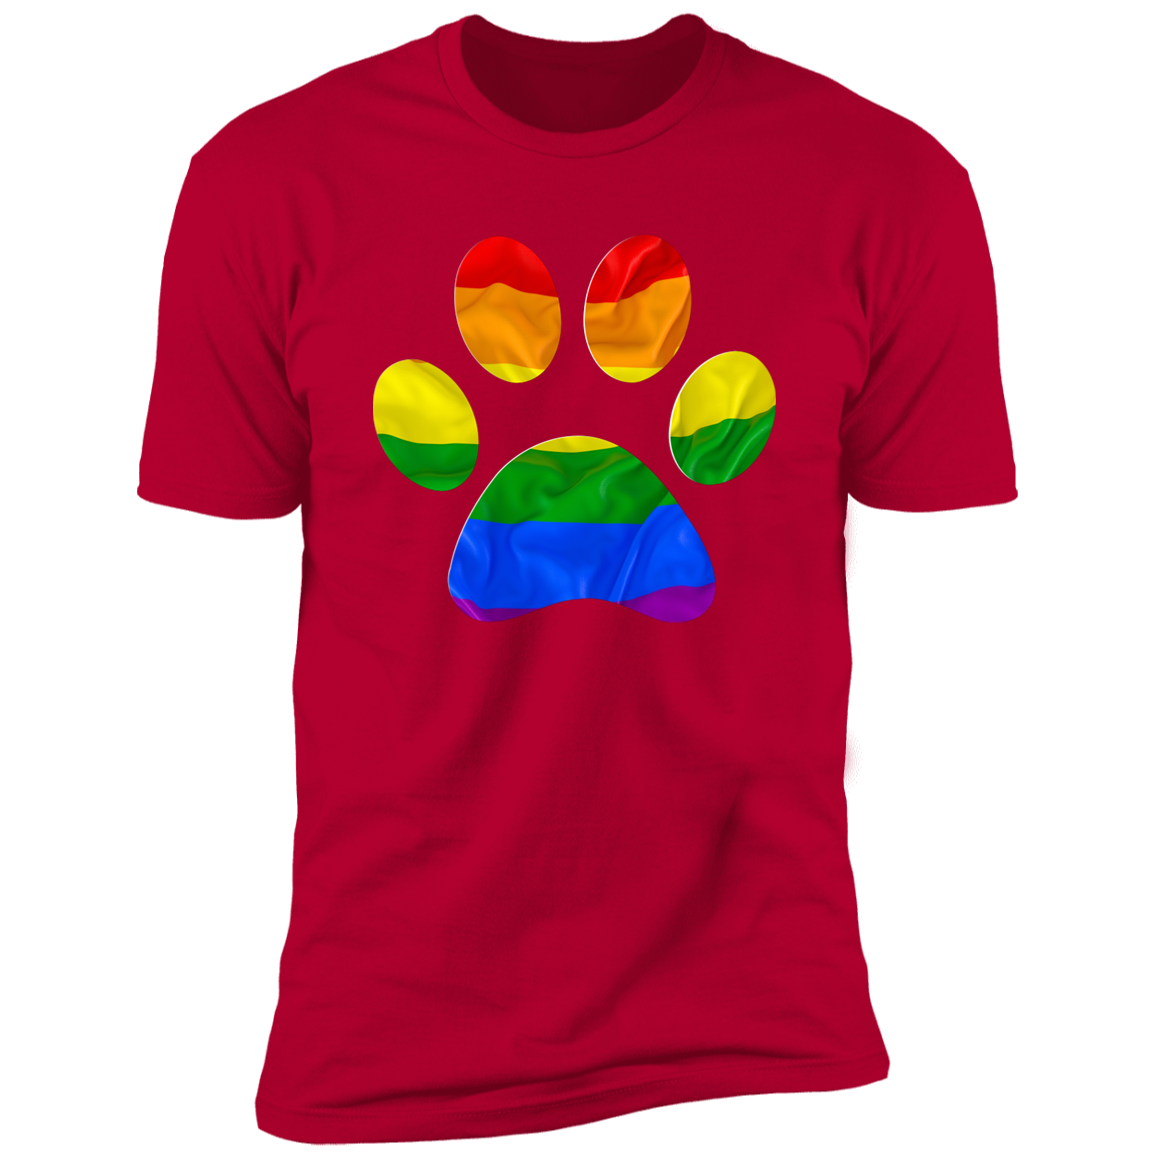 Pride Paw Pride T-shirt, Paw Pride Dog Shirt for humans, in red